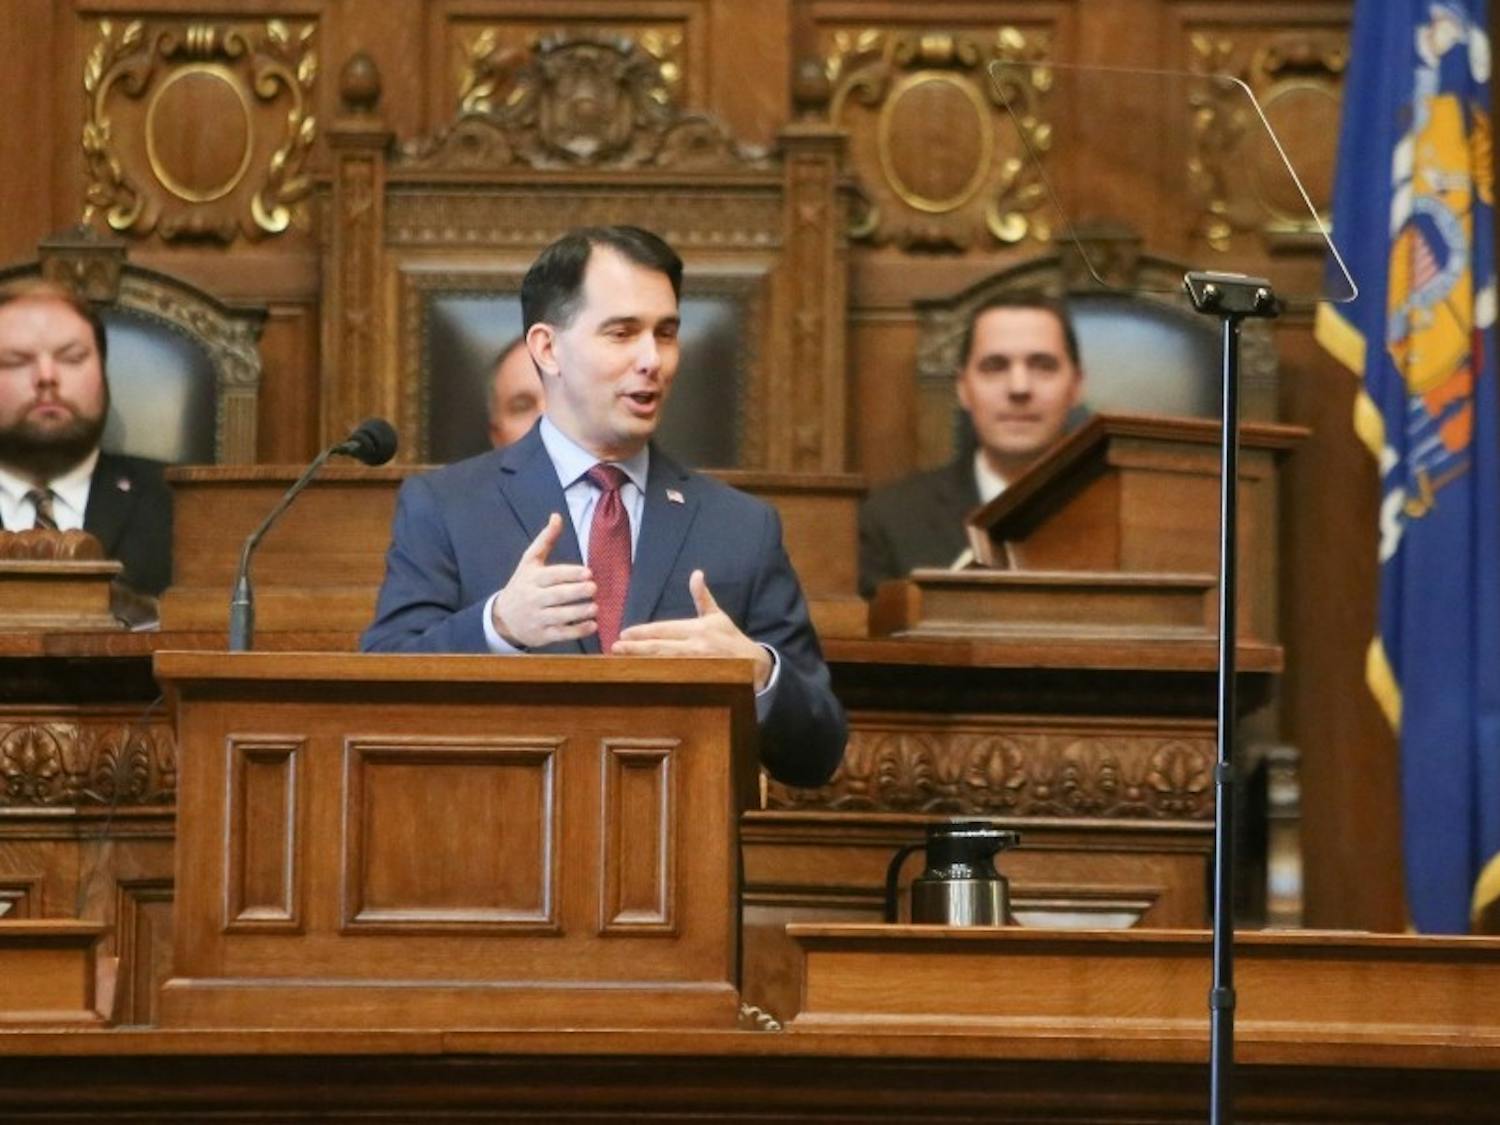 The Wisconsin Joint Finance Committee passed a motion rejecting Gov. Scott Walker's proposed 5 percent tuition cut for UW System schools and continuing the tuition freeze.